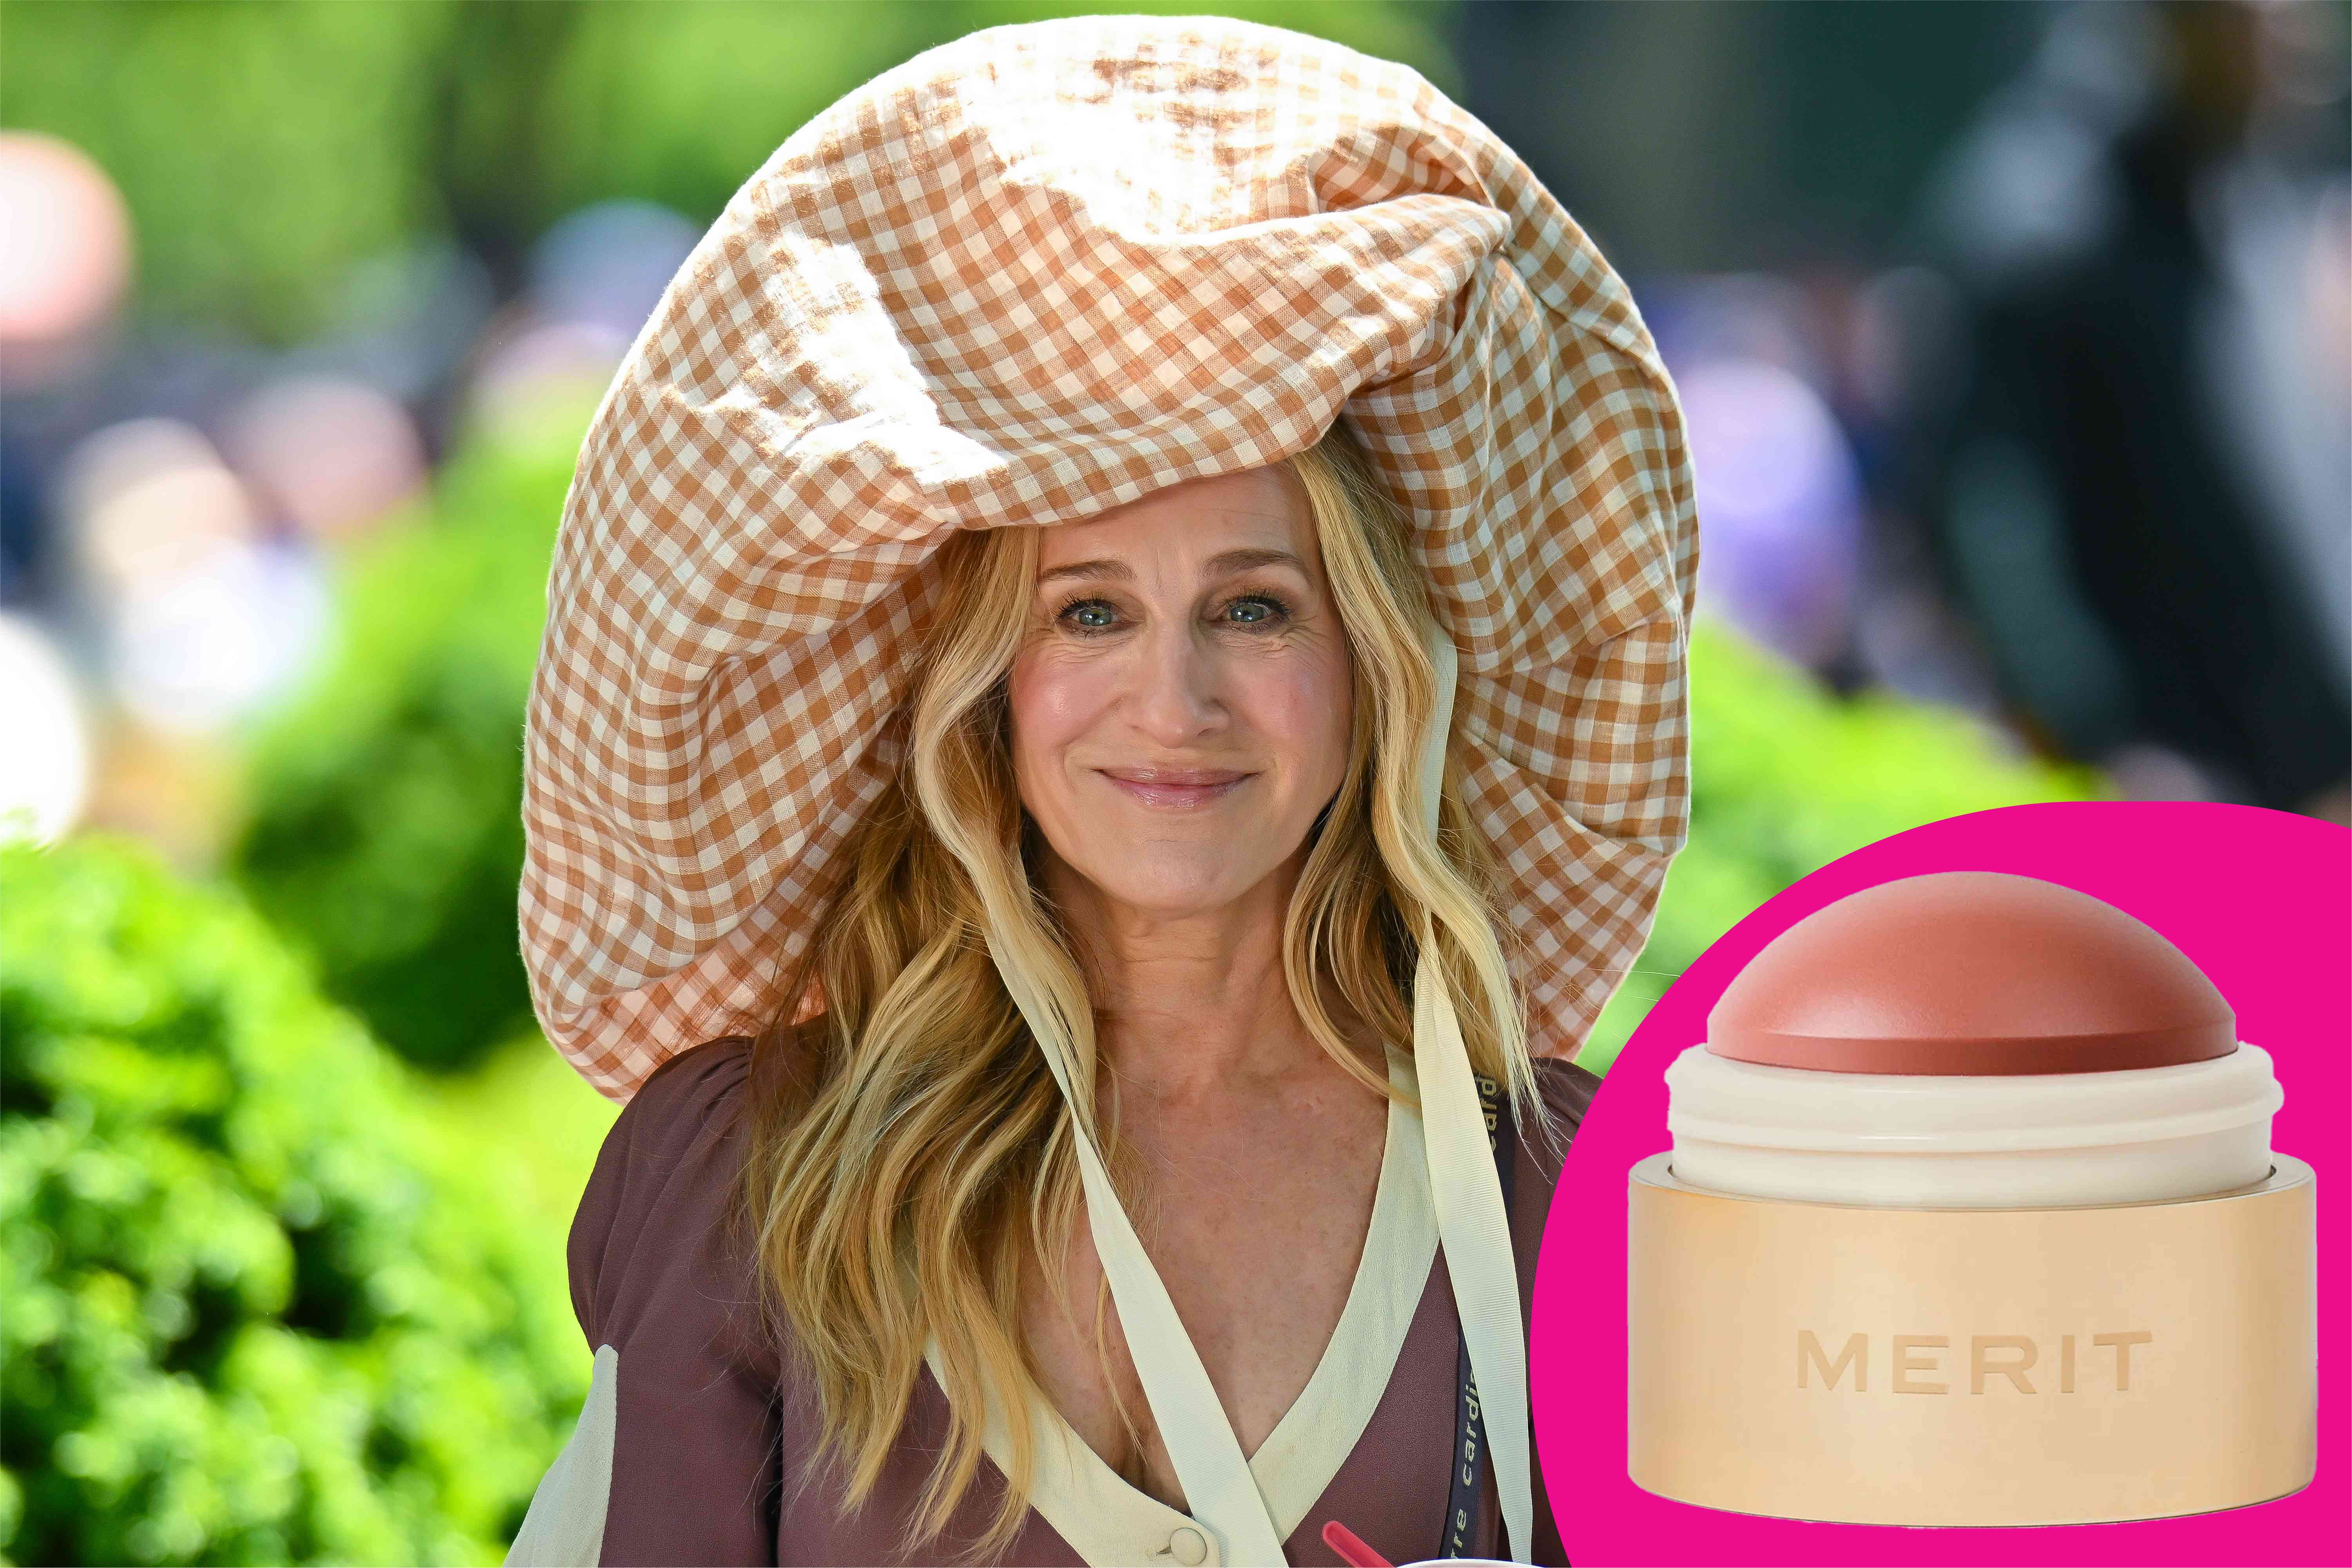 Carrie Bradshaw’s ‘Glowy’ Look Is Thanks to This $30 Cream Blush That’s Been Used on Her for Every Season of “AJLT…”